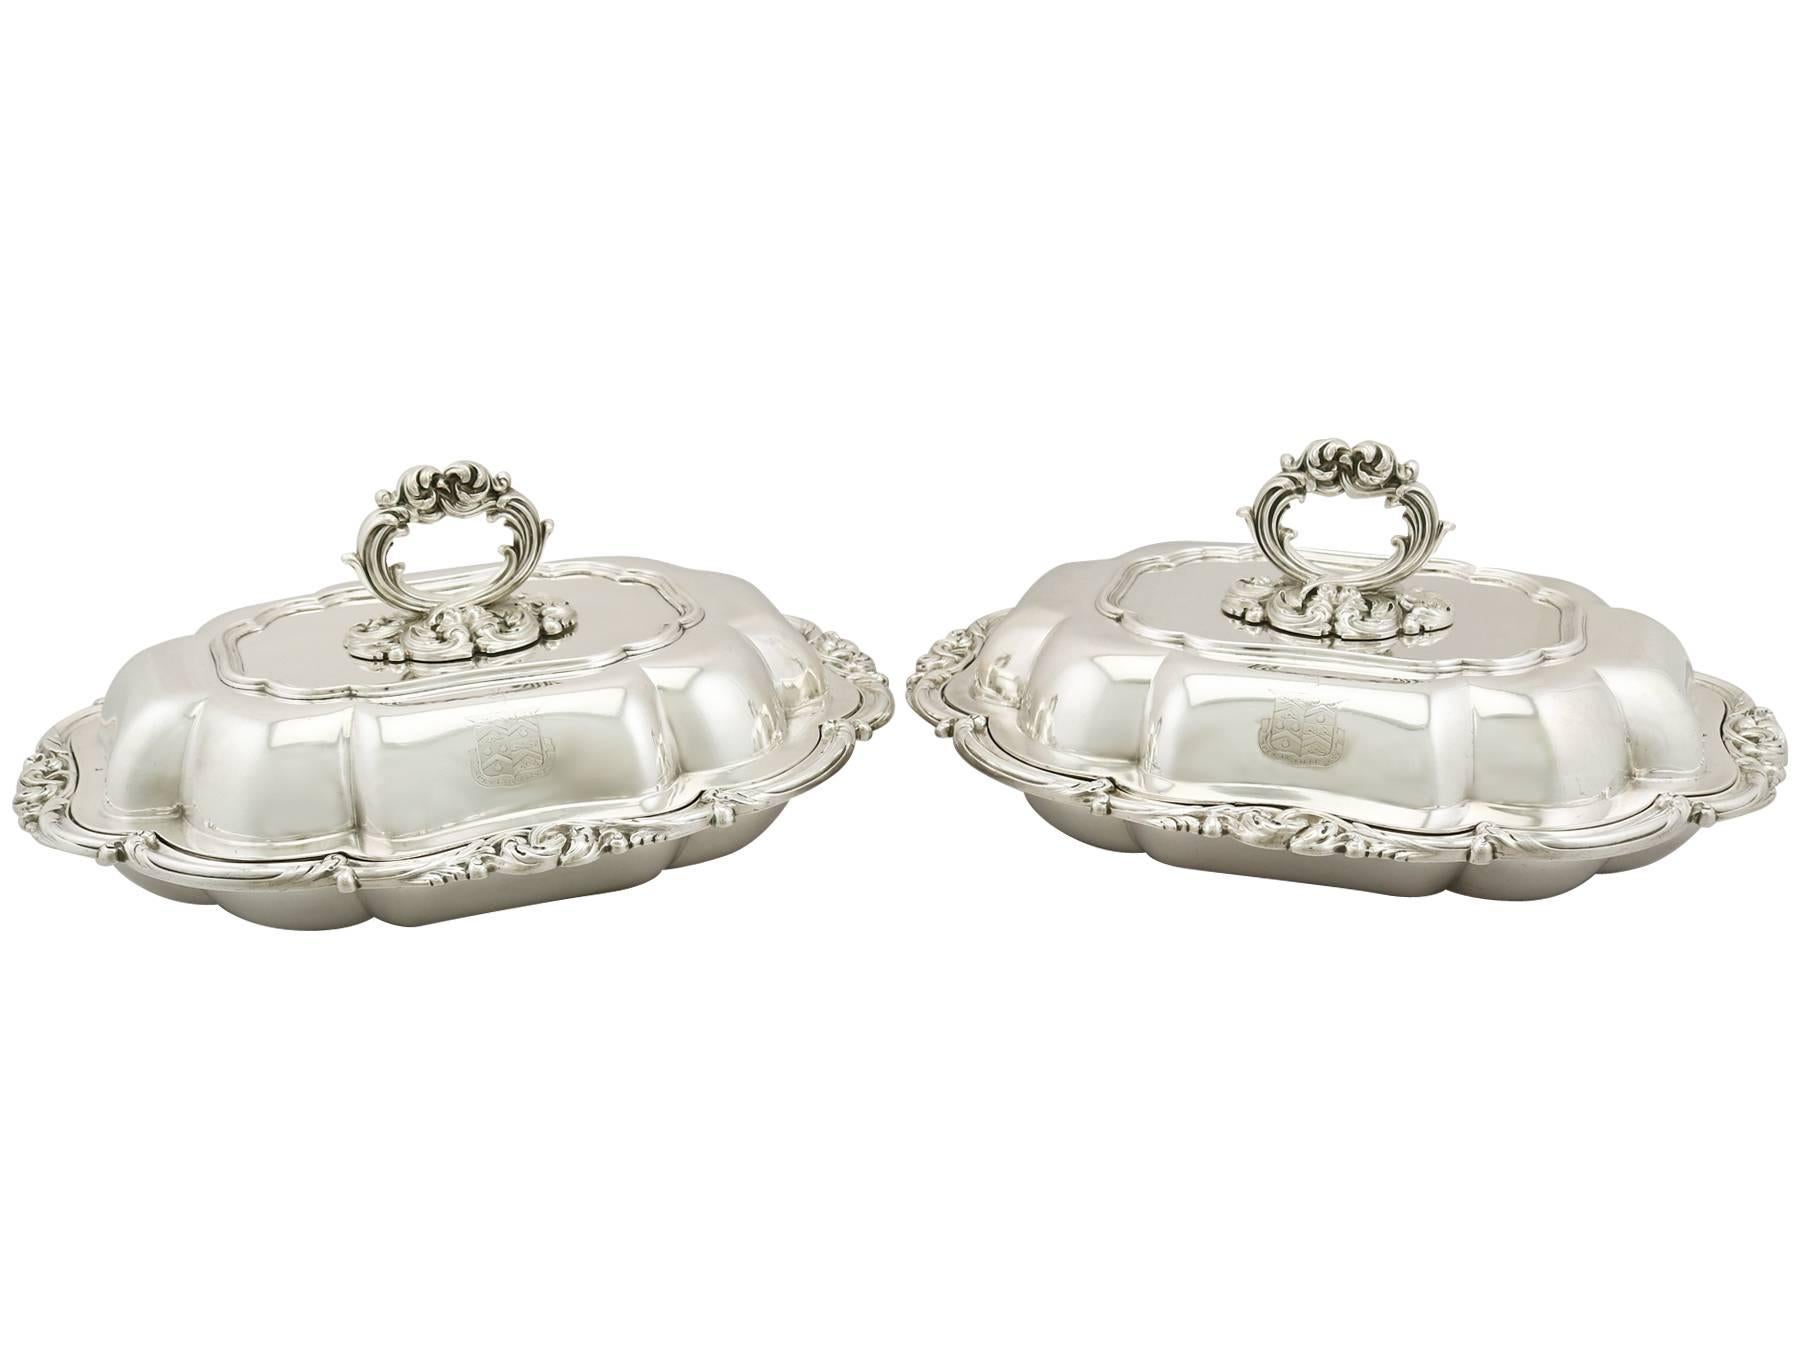 An exceptional, fine and impressive pair of antique William IV English sterling silver entree dishes; an addition to our ornamental dining collection.

These exceptional antique William IV sterling silver entrée dishes have an oval shaped